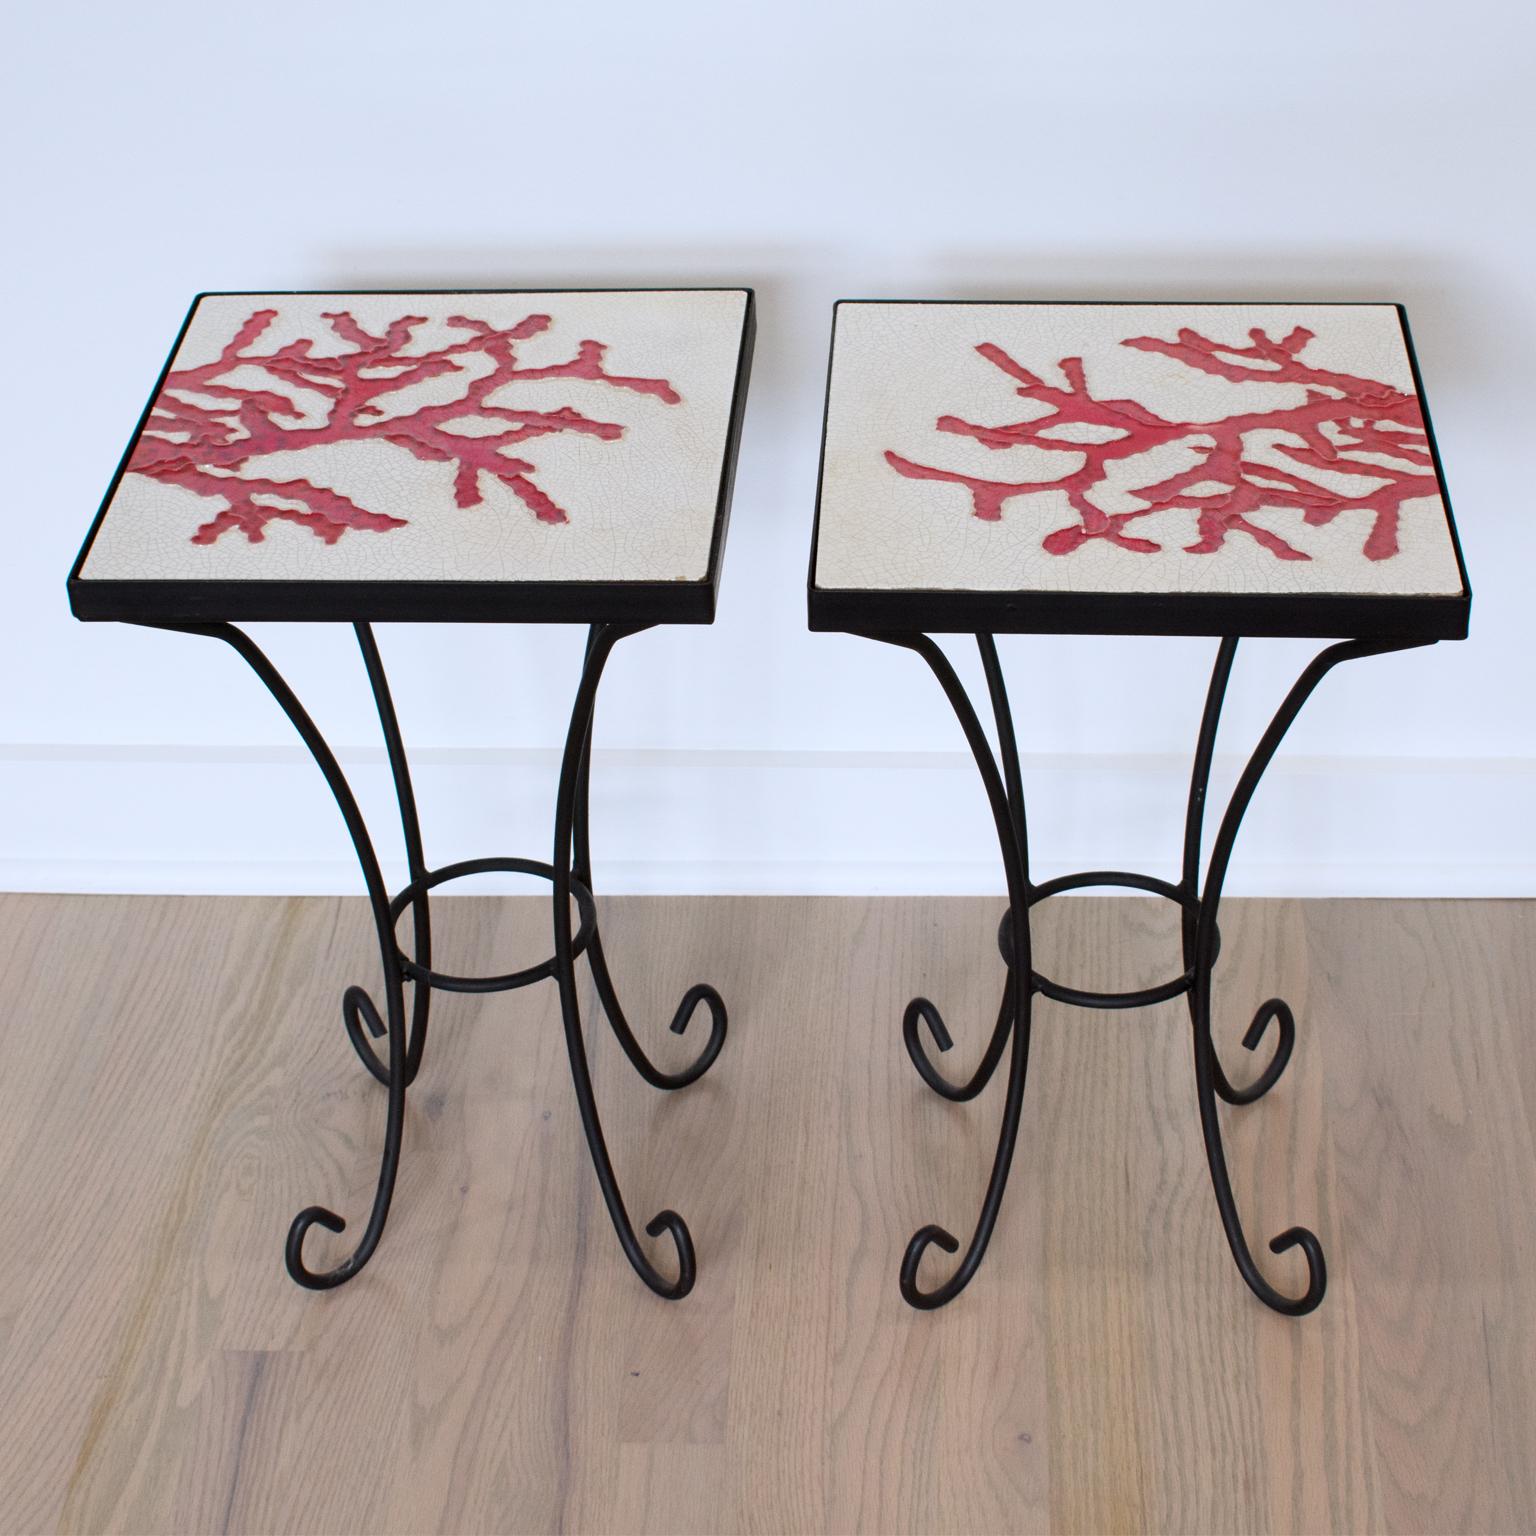 Wrought Iron and Ceramic Tile Side Coffee Table, a pair, 1950s For Sale 13